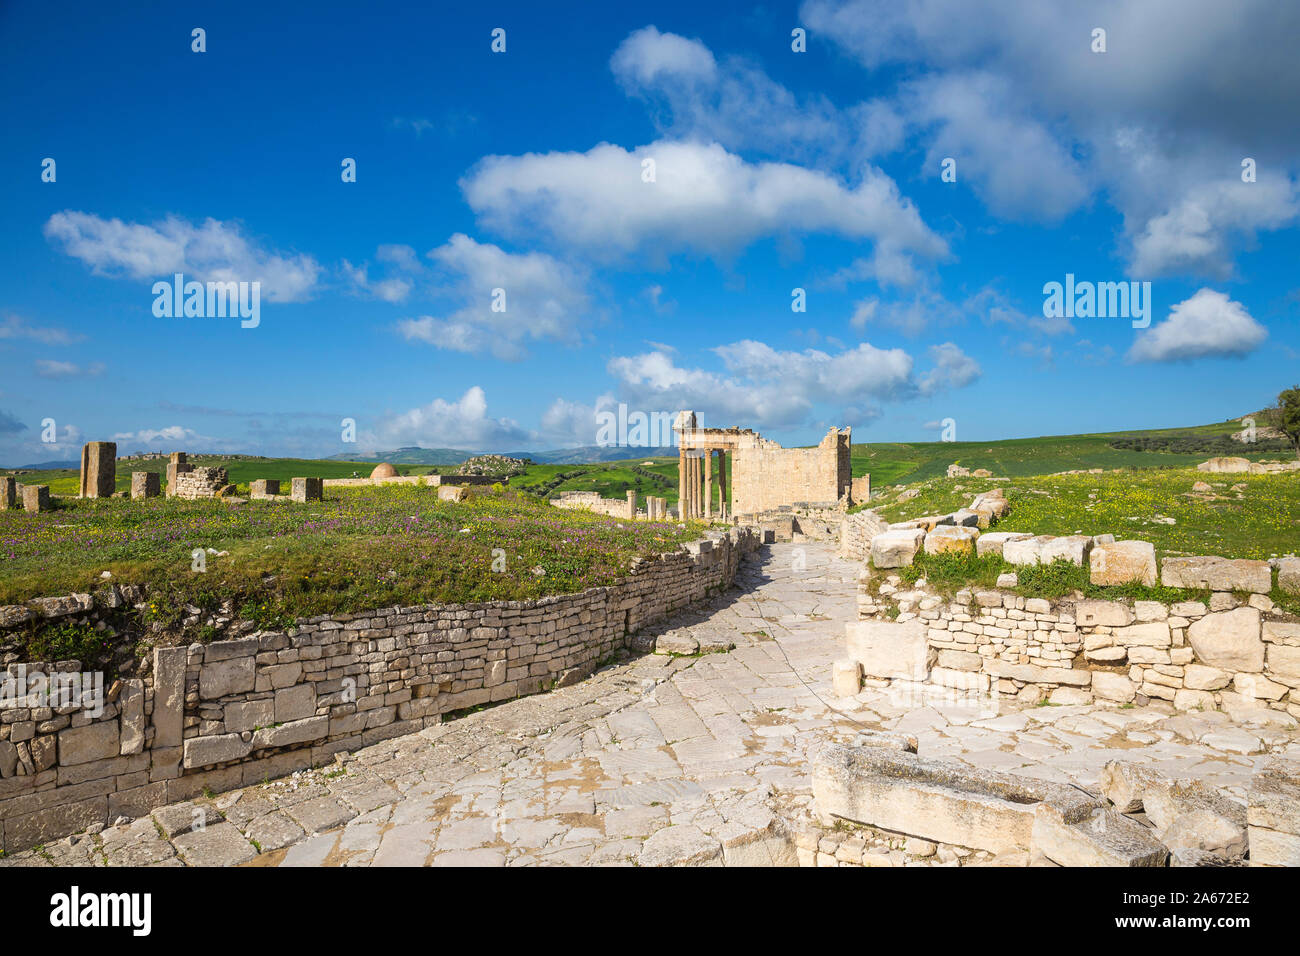 Tunisia, Teboursouk, Dougga archaeological site, Roman road leading to The Capitol, a Roman temple, an ancient Mosque to the left Stock Photo